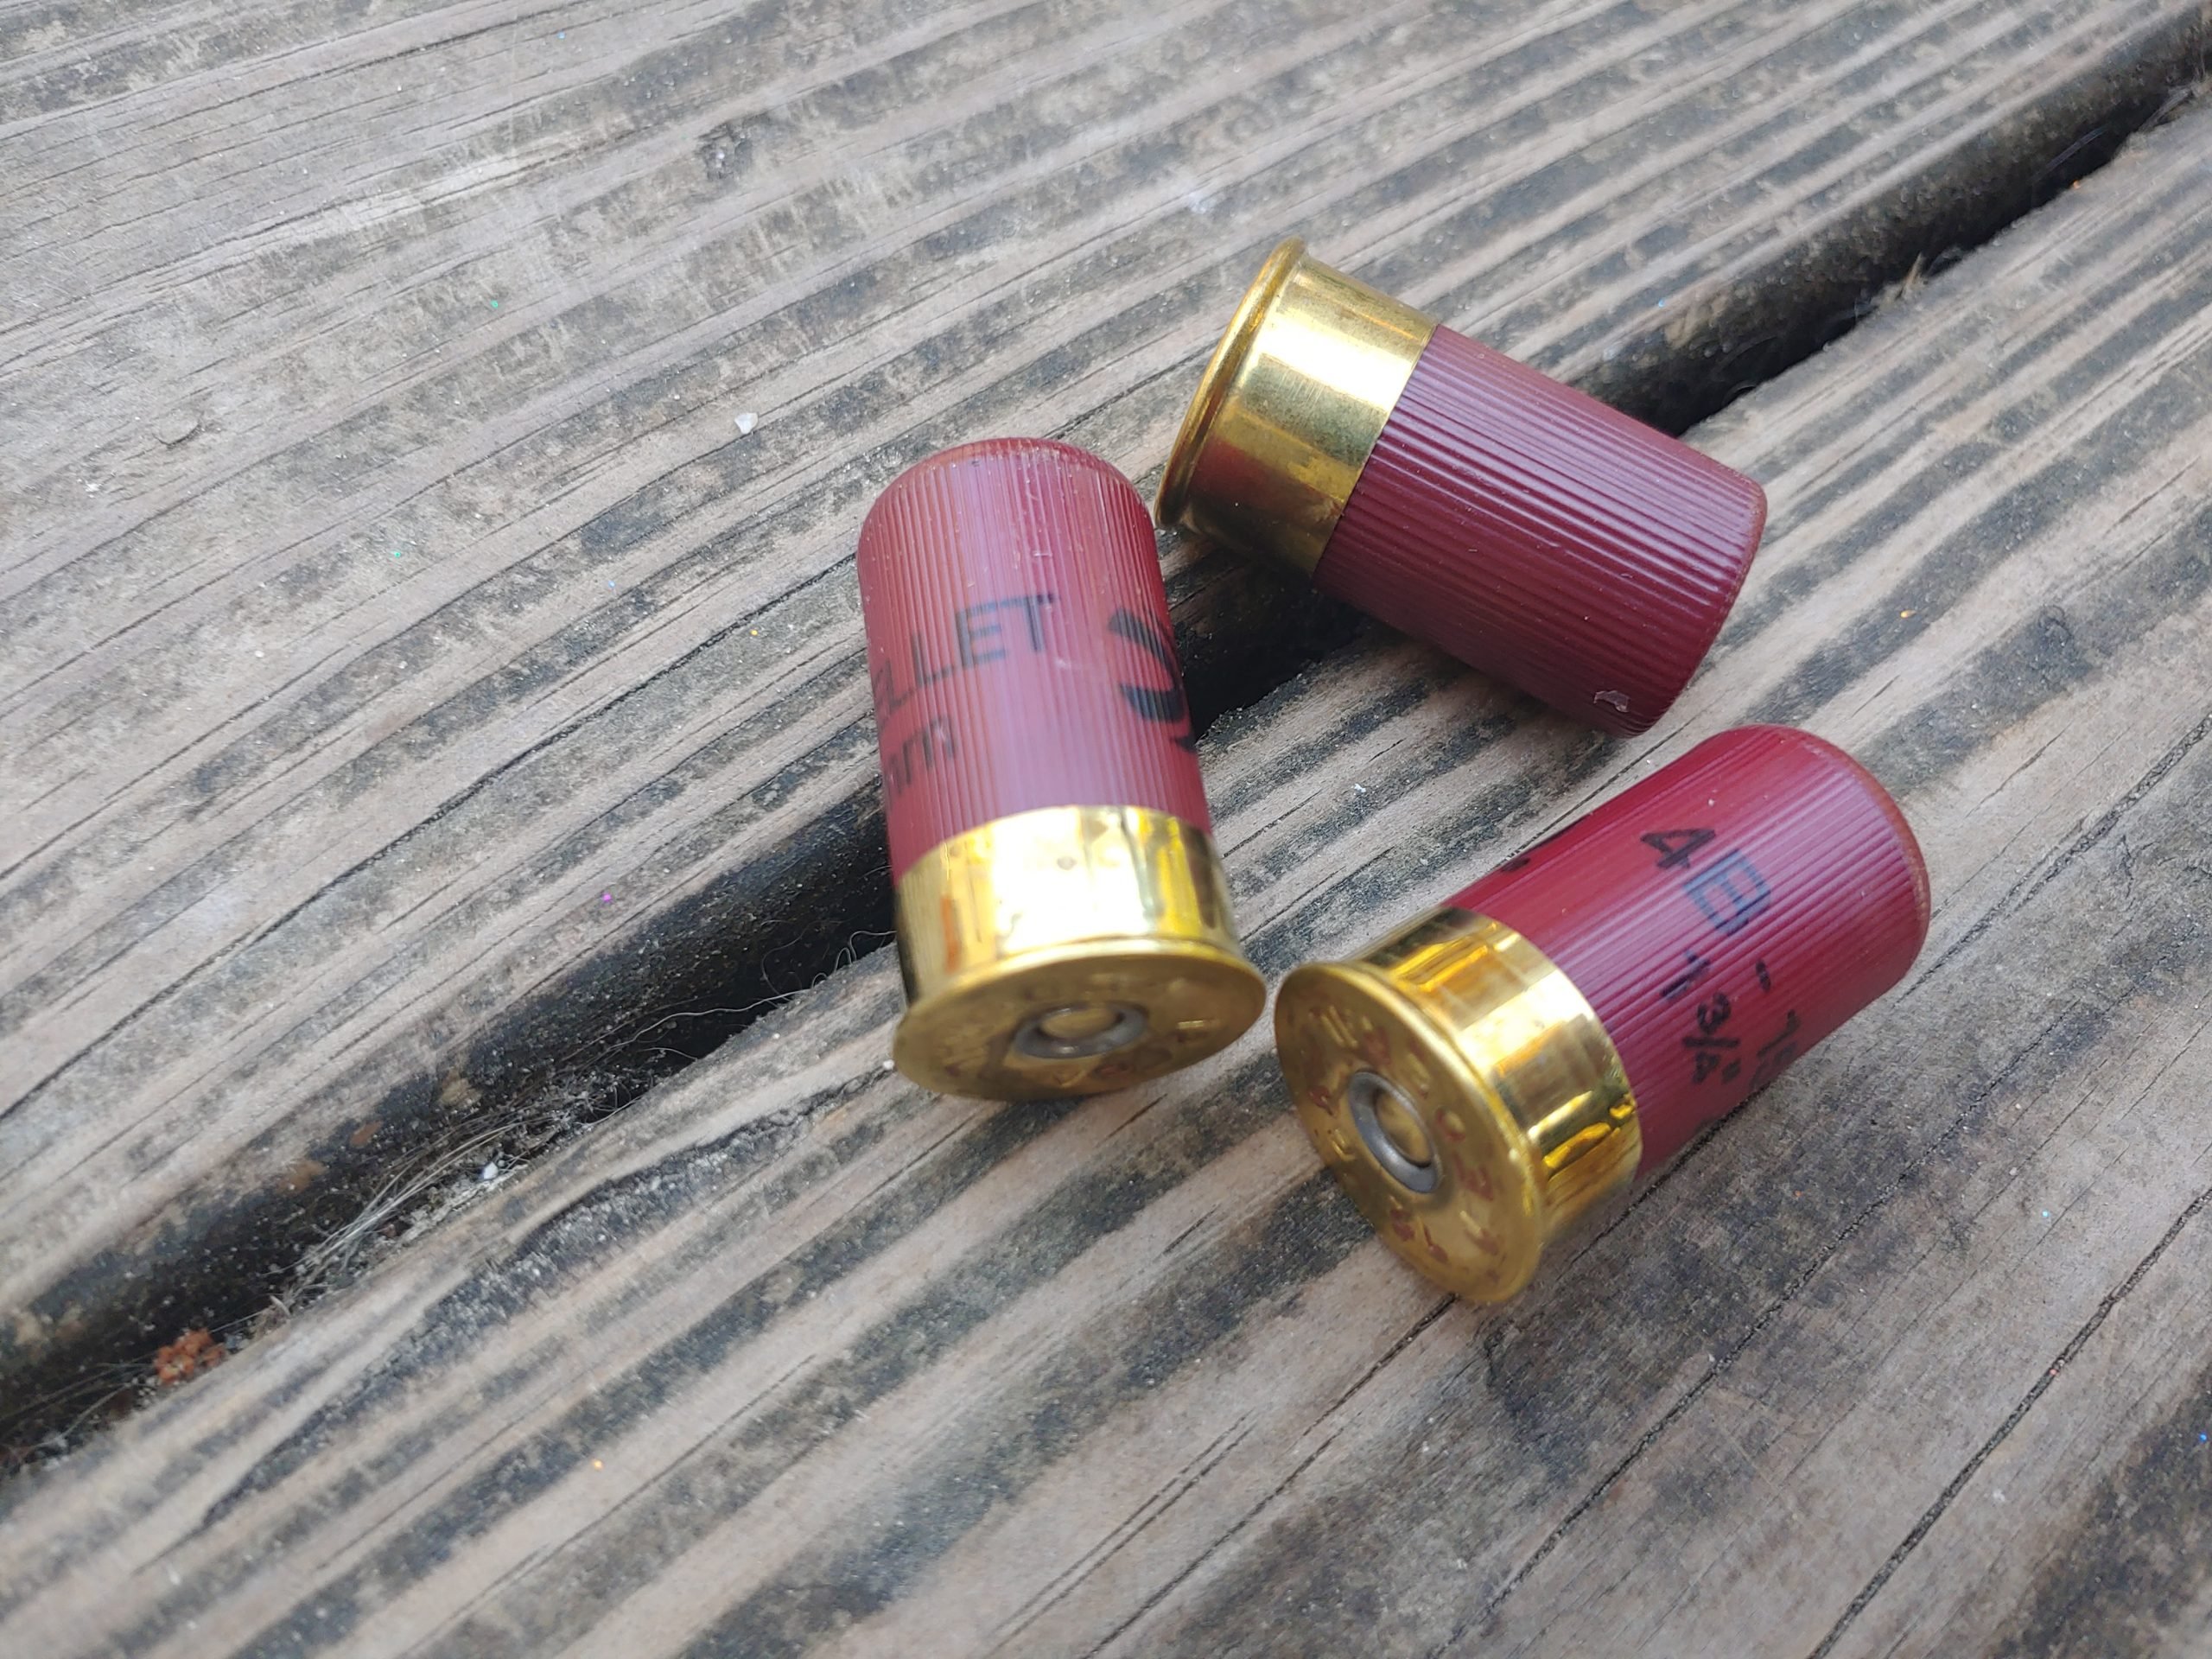 12 gauge mini shells are popular, but not what you want for home defense.